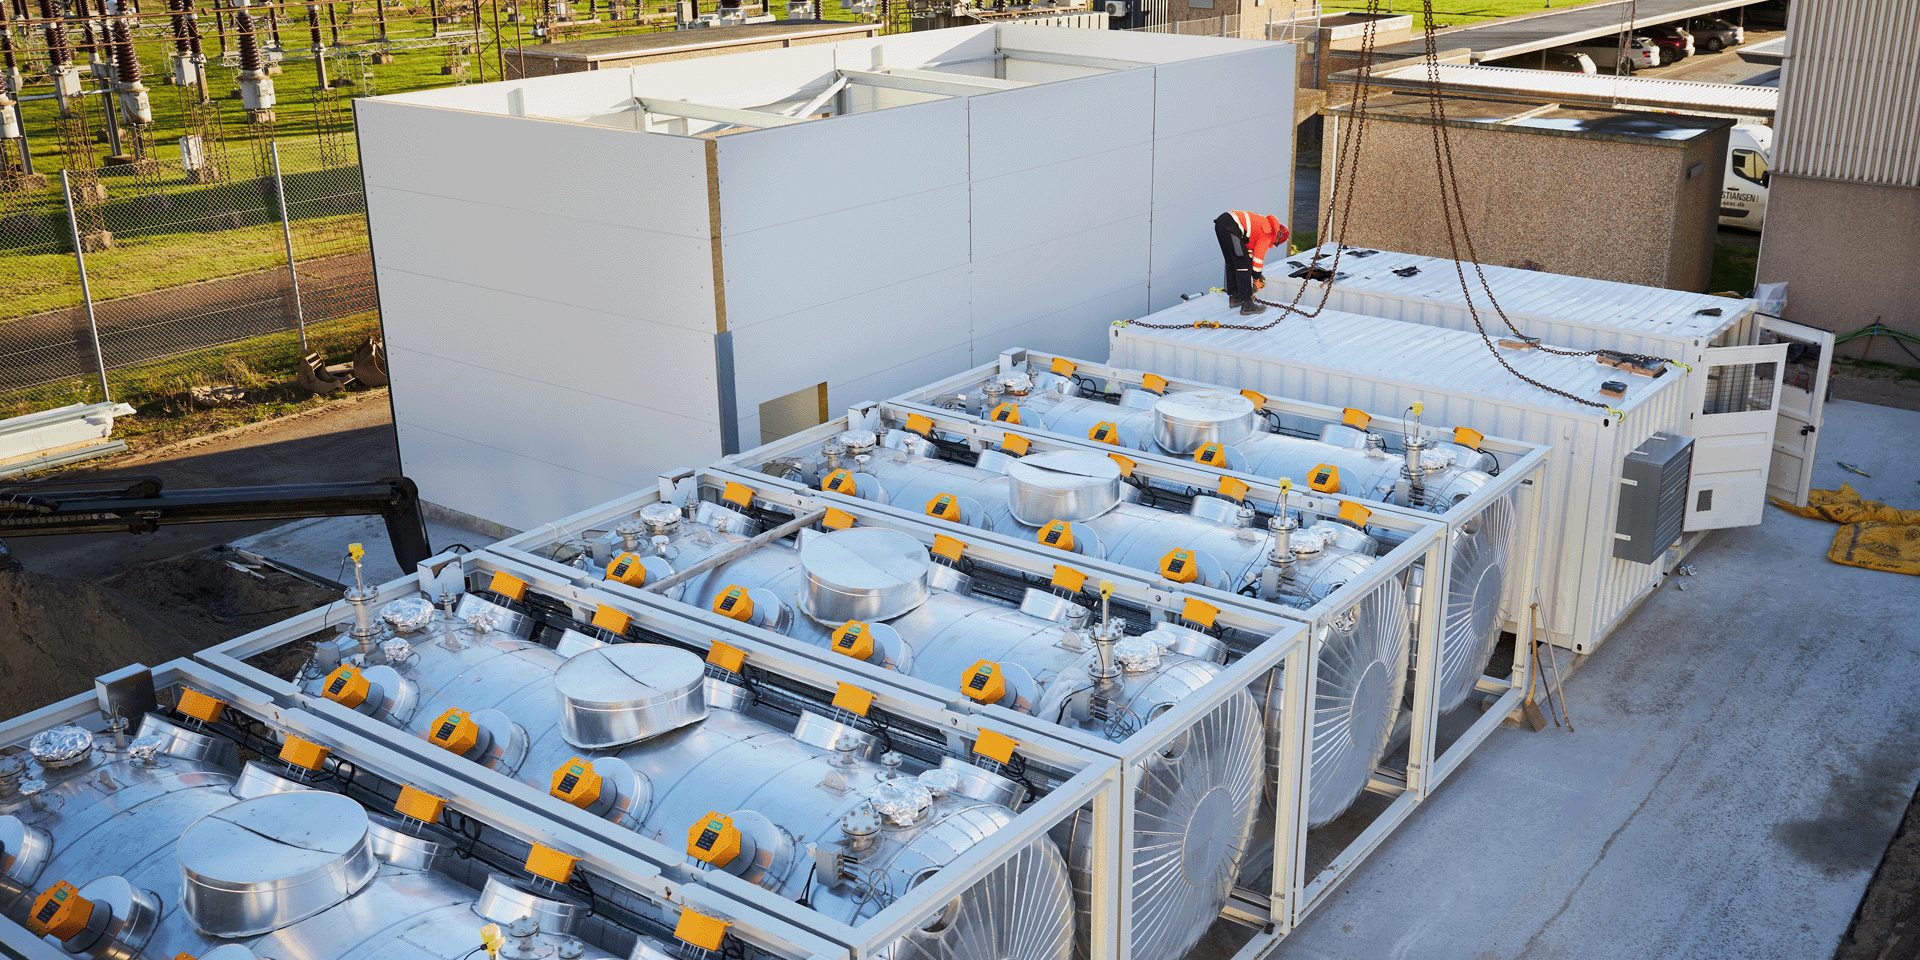 Kyoto Heatcube thermal battery on site, a worker in an orange reflex jacket stands on a white container outside.